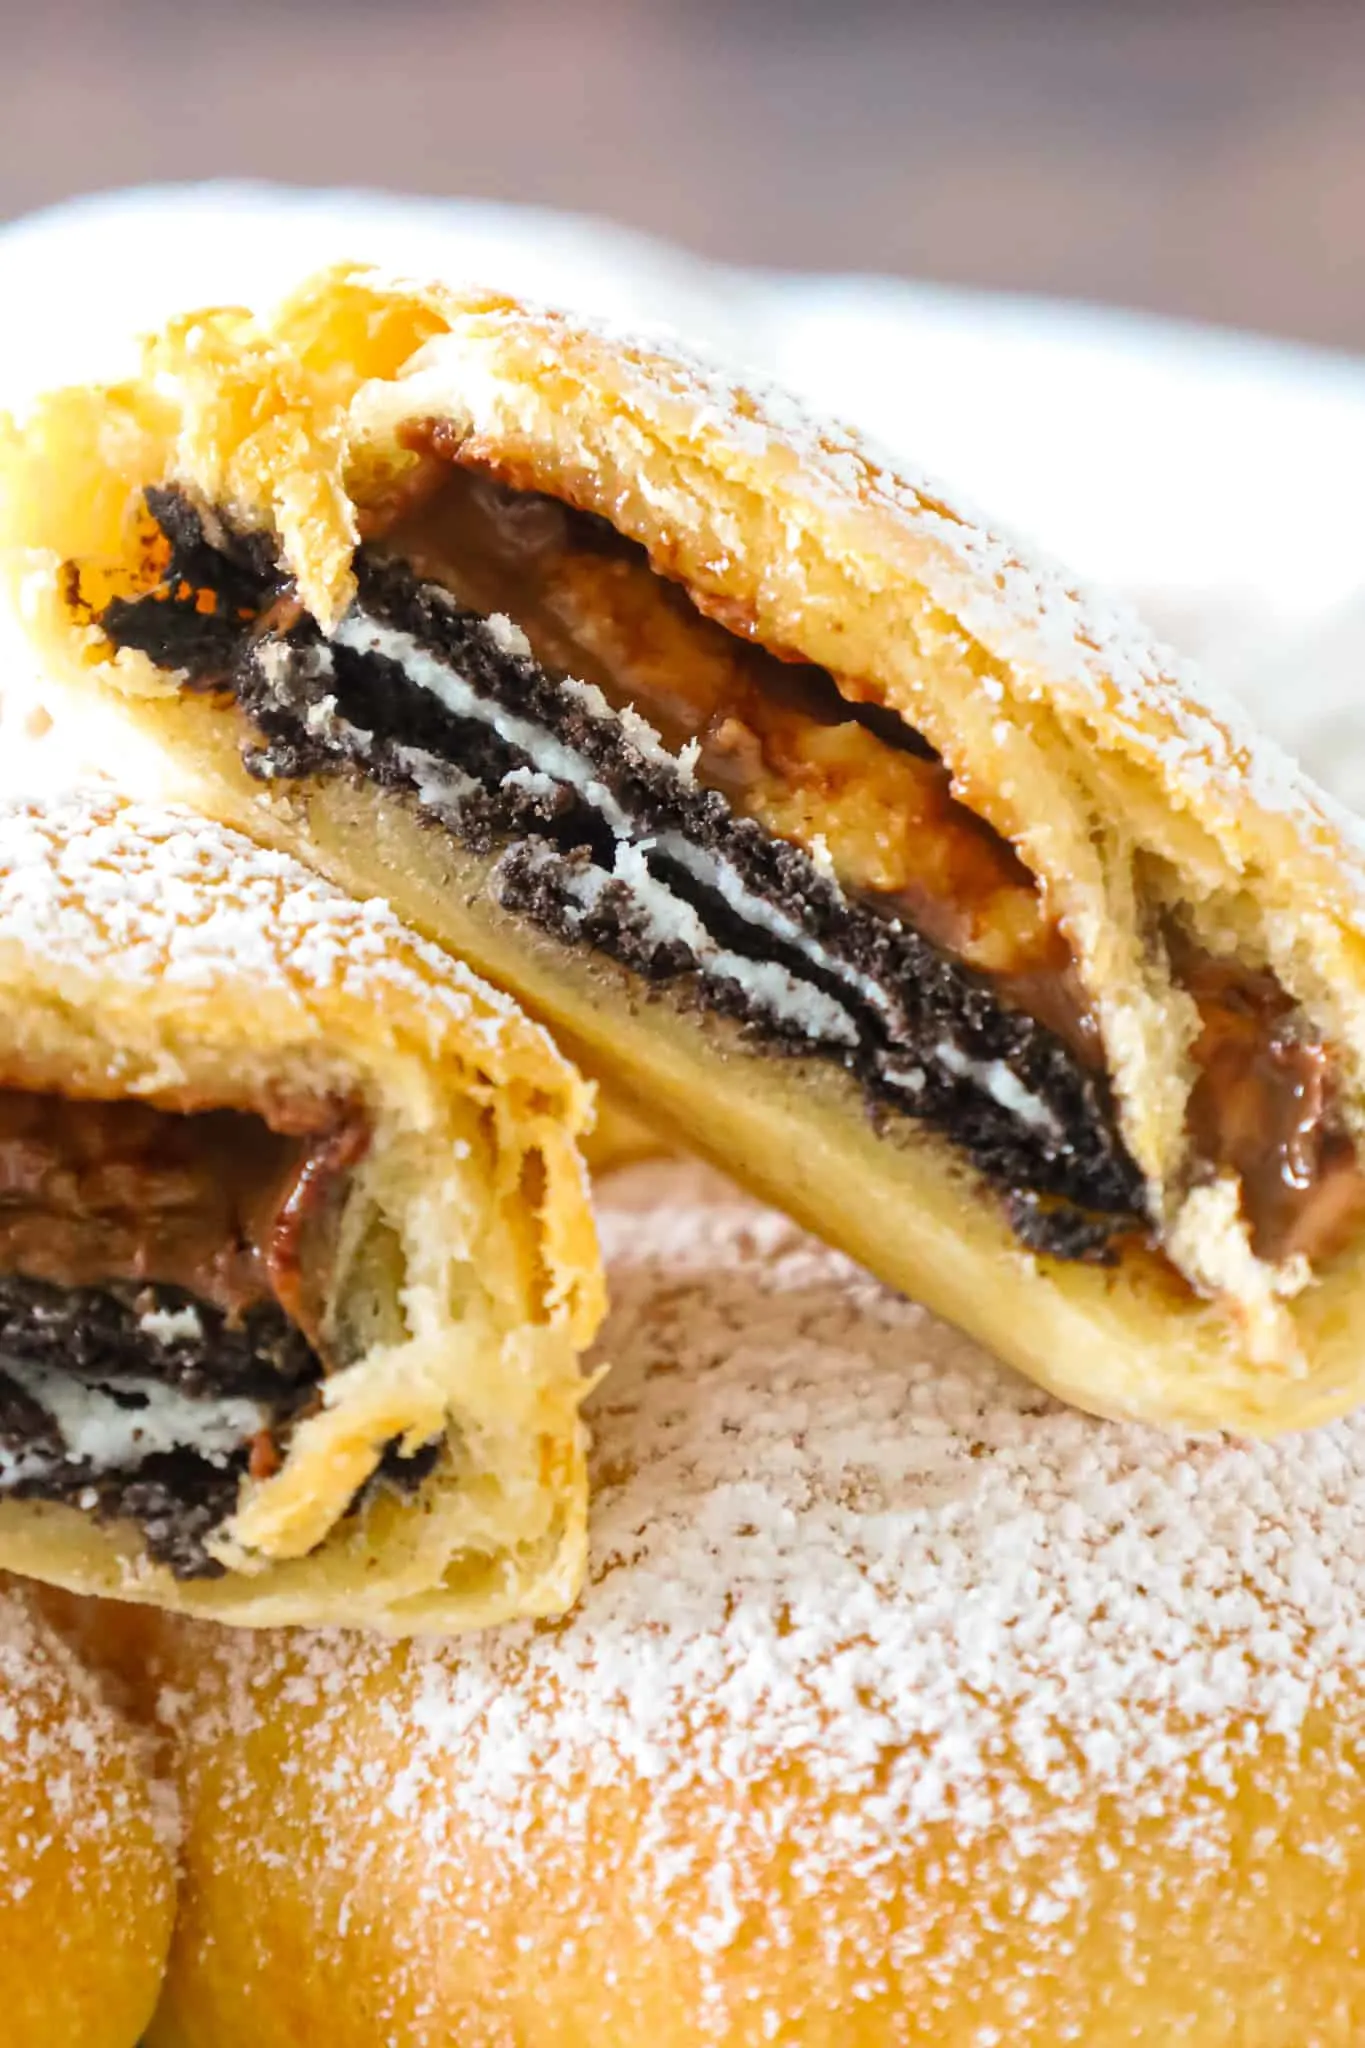 Air Fryer Oreos are a fun twist on deep fried Oreos. These tasty treats are made with Oreo thins and Reese's peanut butter cup thins wrapped in Pillsbury crescent roll dough and air fried until golden brown.